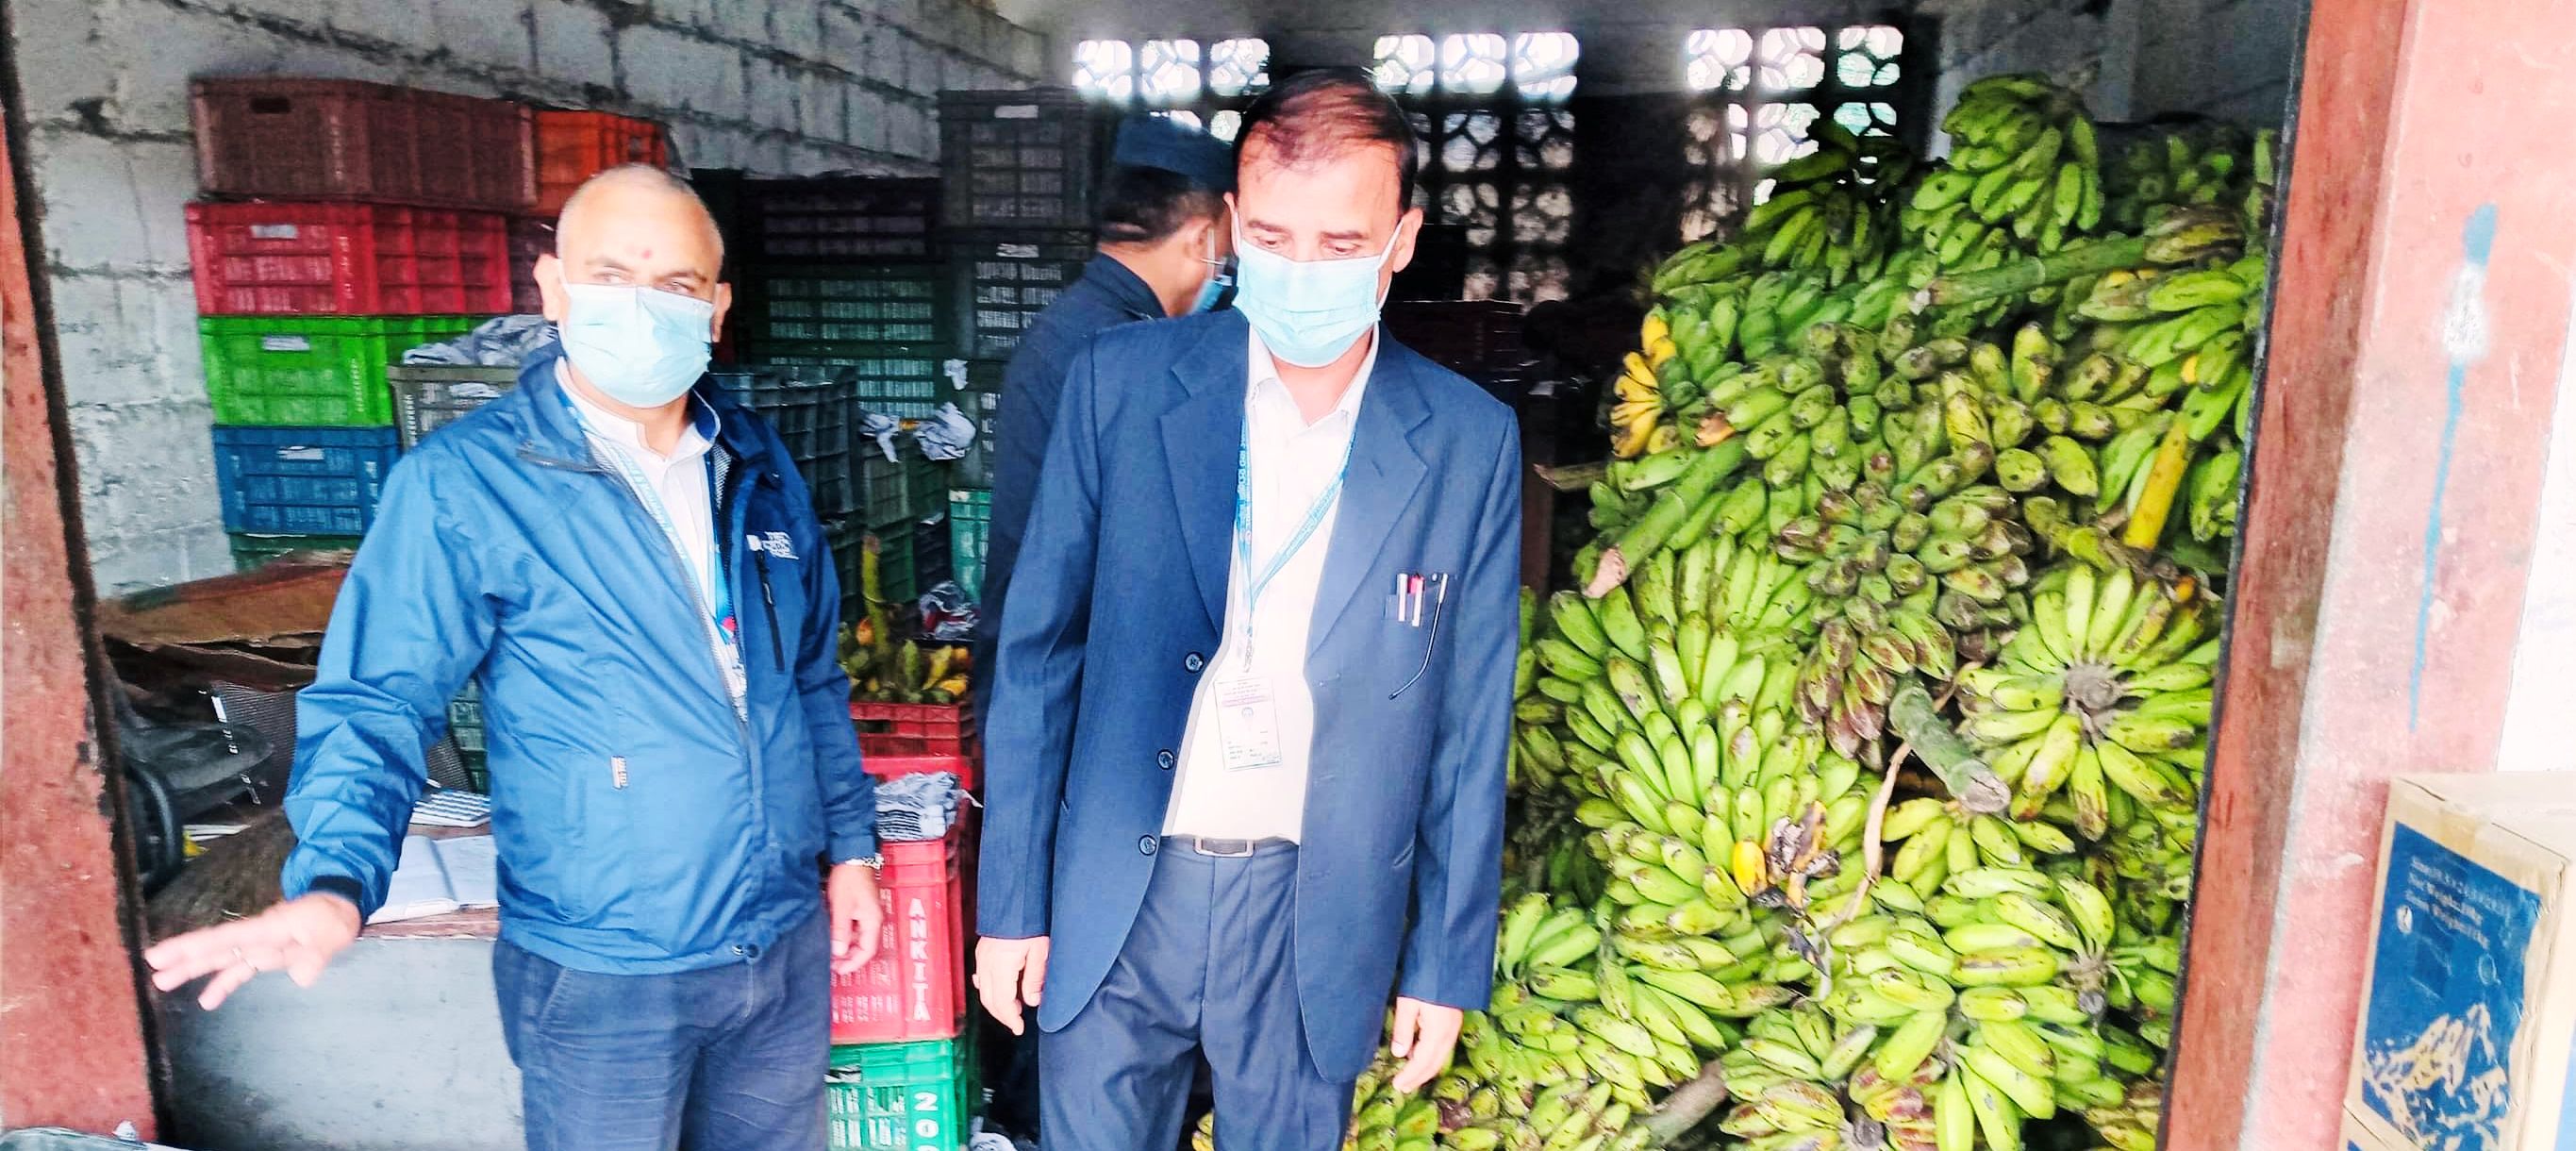 pokhara-shopkeepers-found-using-banned-chemicals-to-ripen-banana